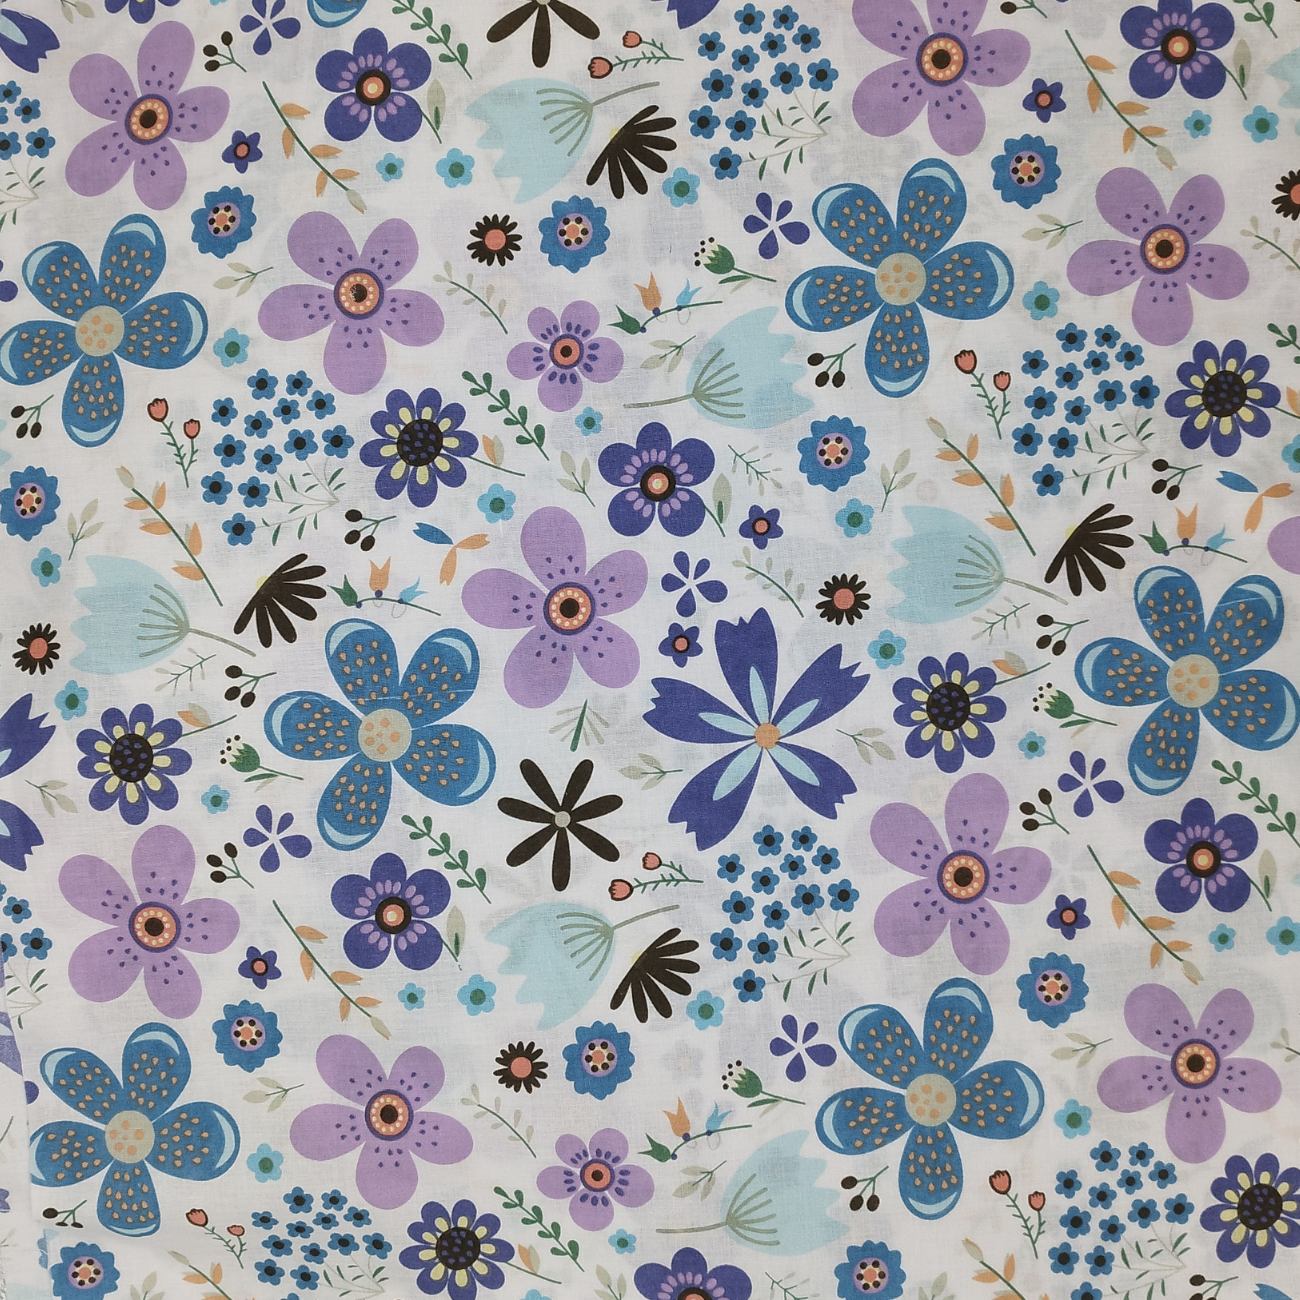 PASTEL FLOWERS - Cotton woven fabric